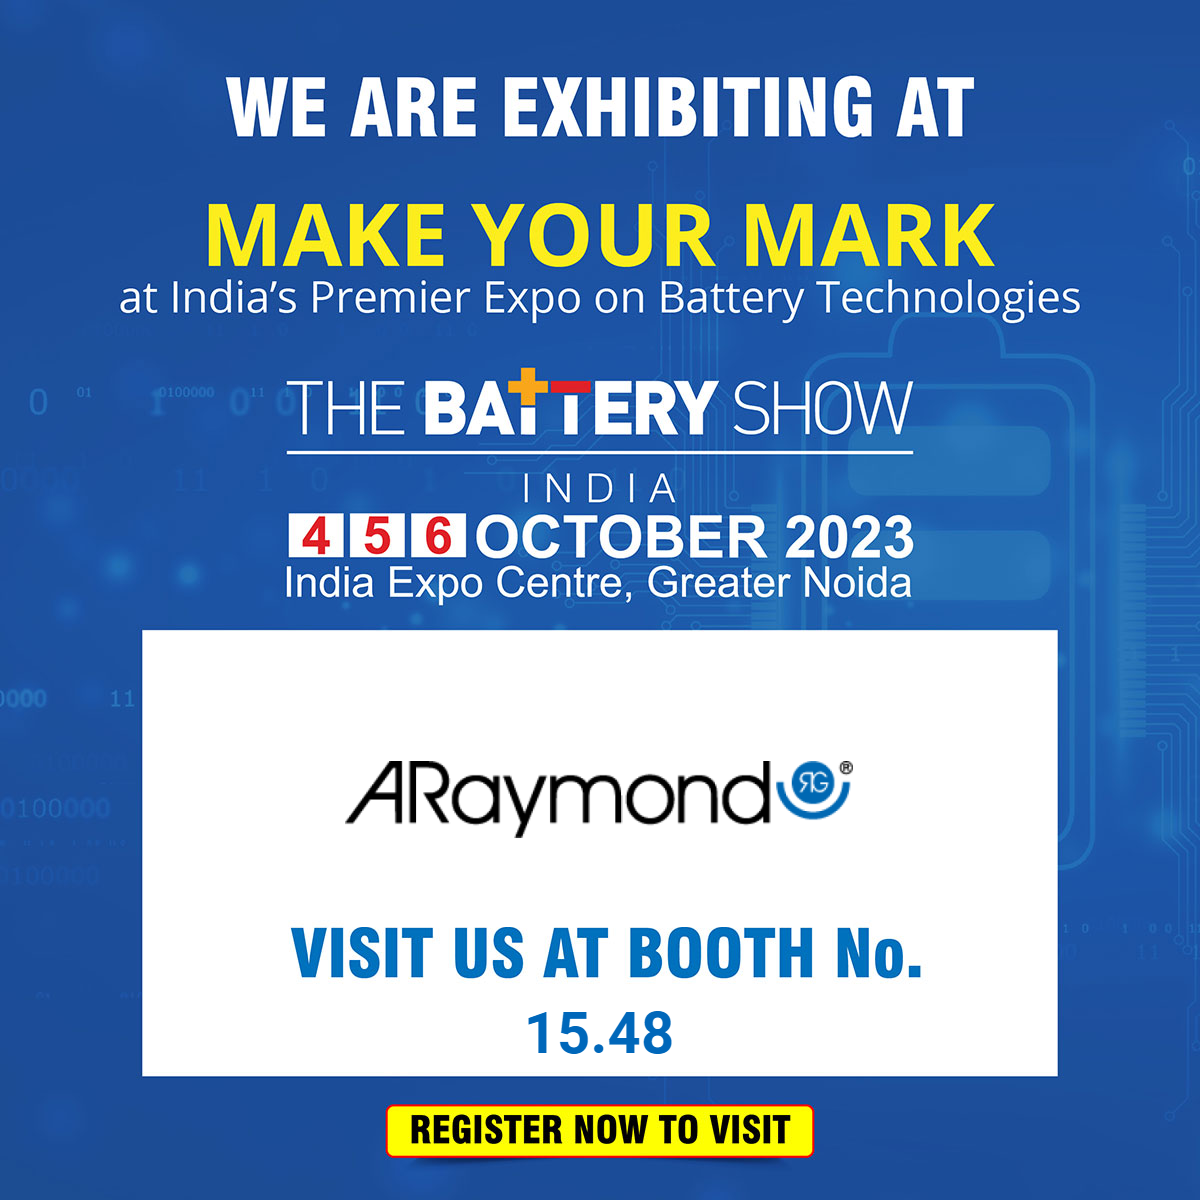 The Battery Show banner